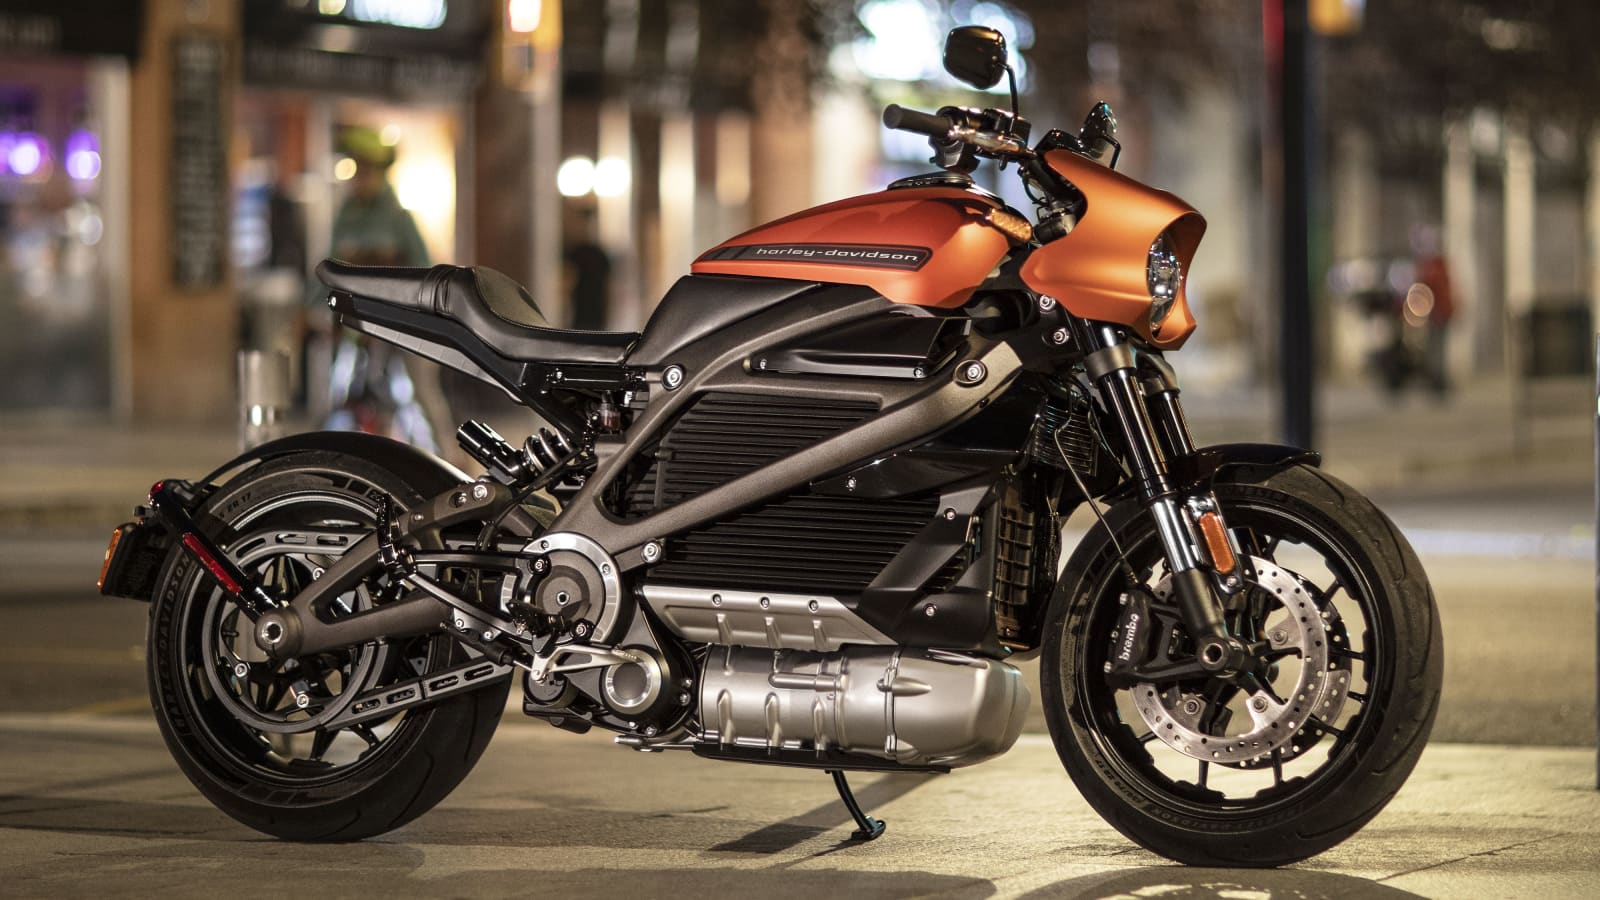 Harley Davidson Halts Production Of New Electric Motorcycles